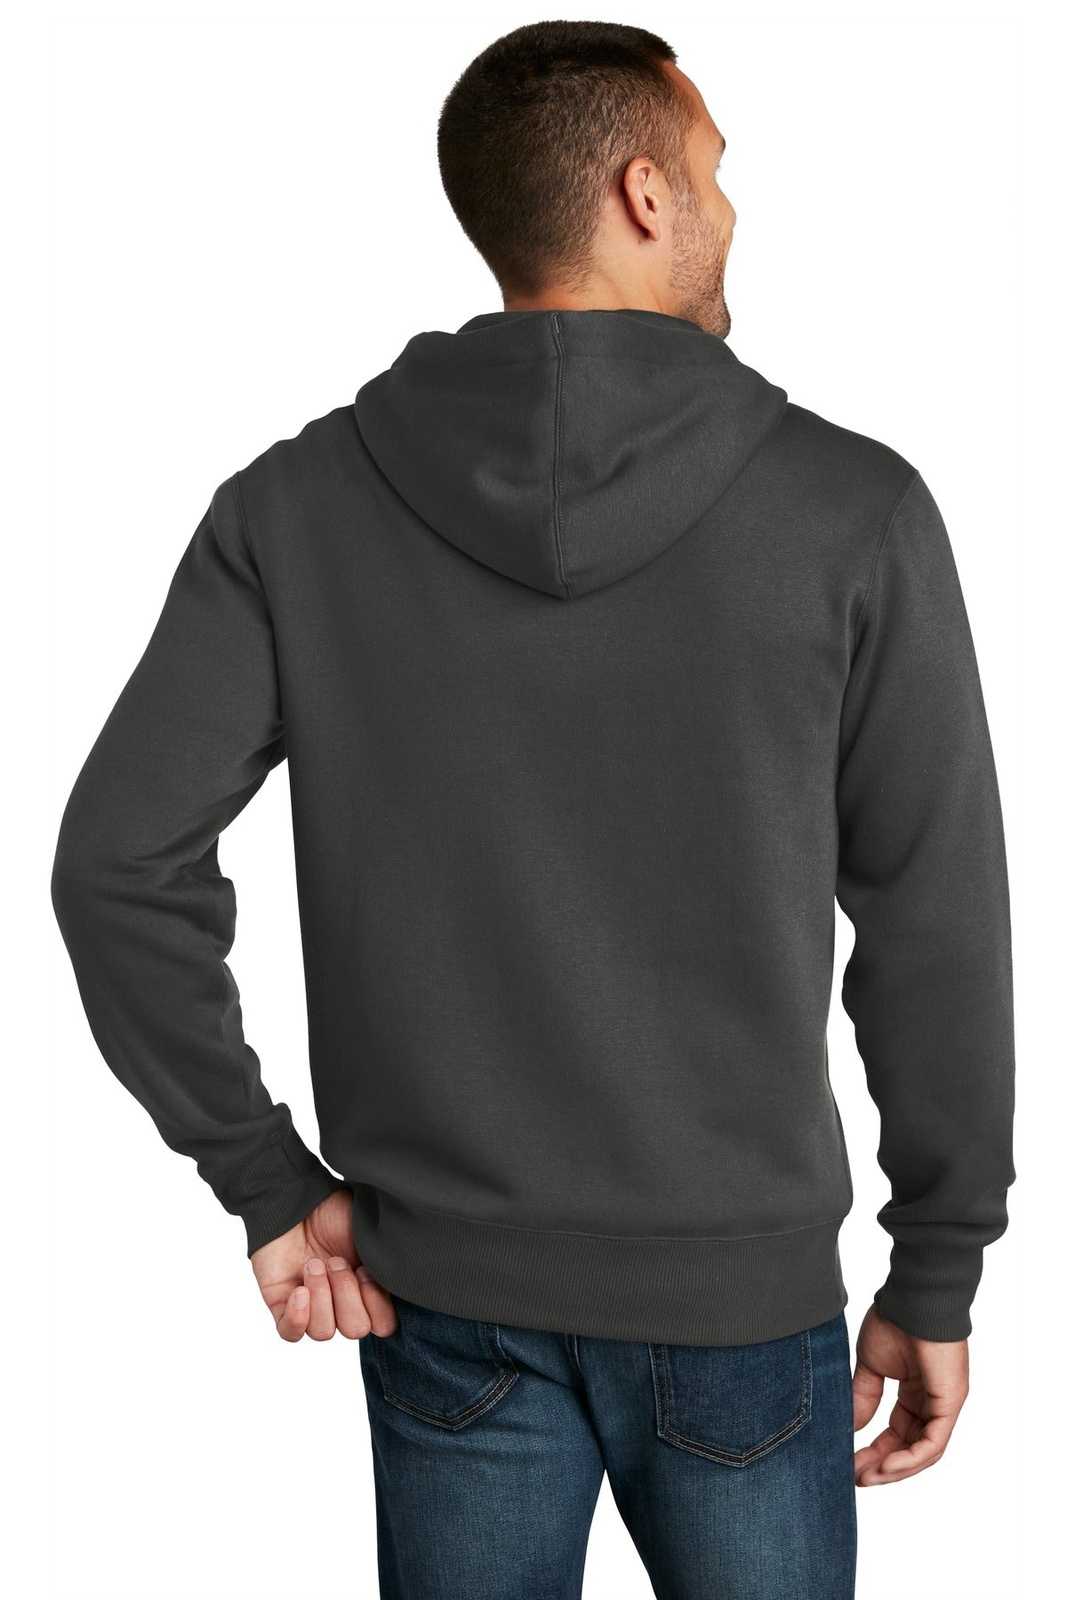 District DT1103 Perfect Weight Fleece Full-Zip Hoodie - Charcoal - HIT a Double - 1